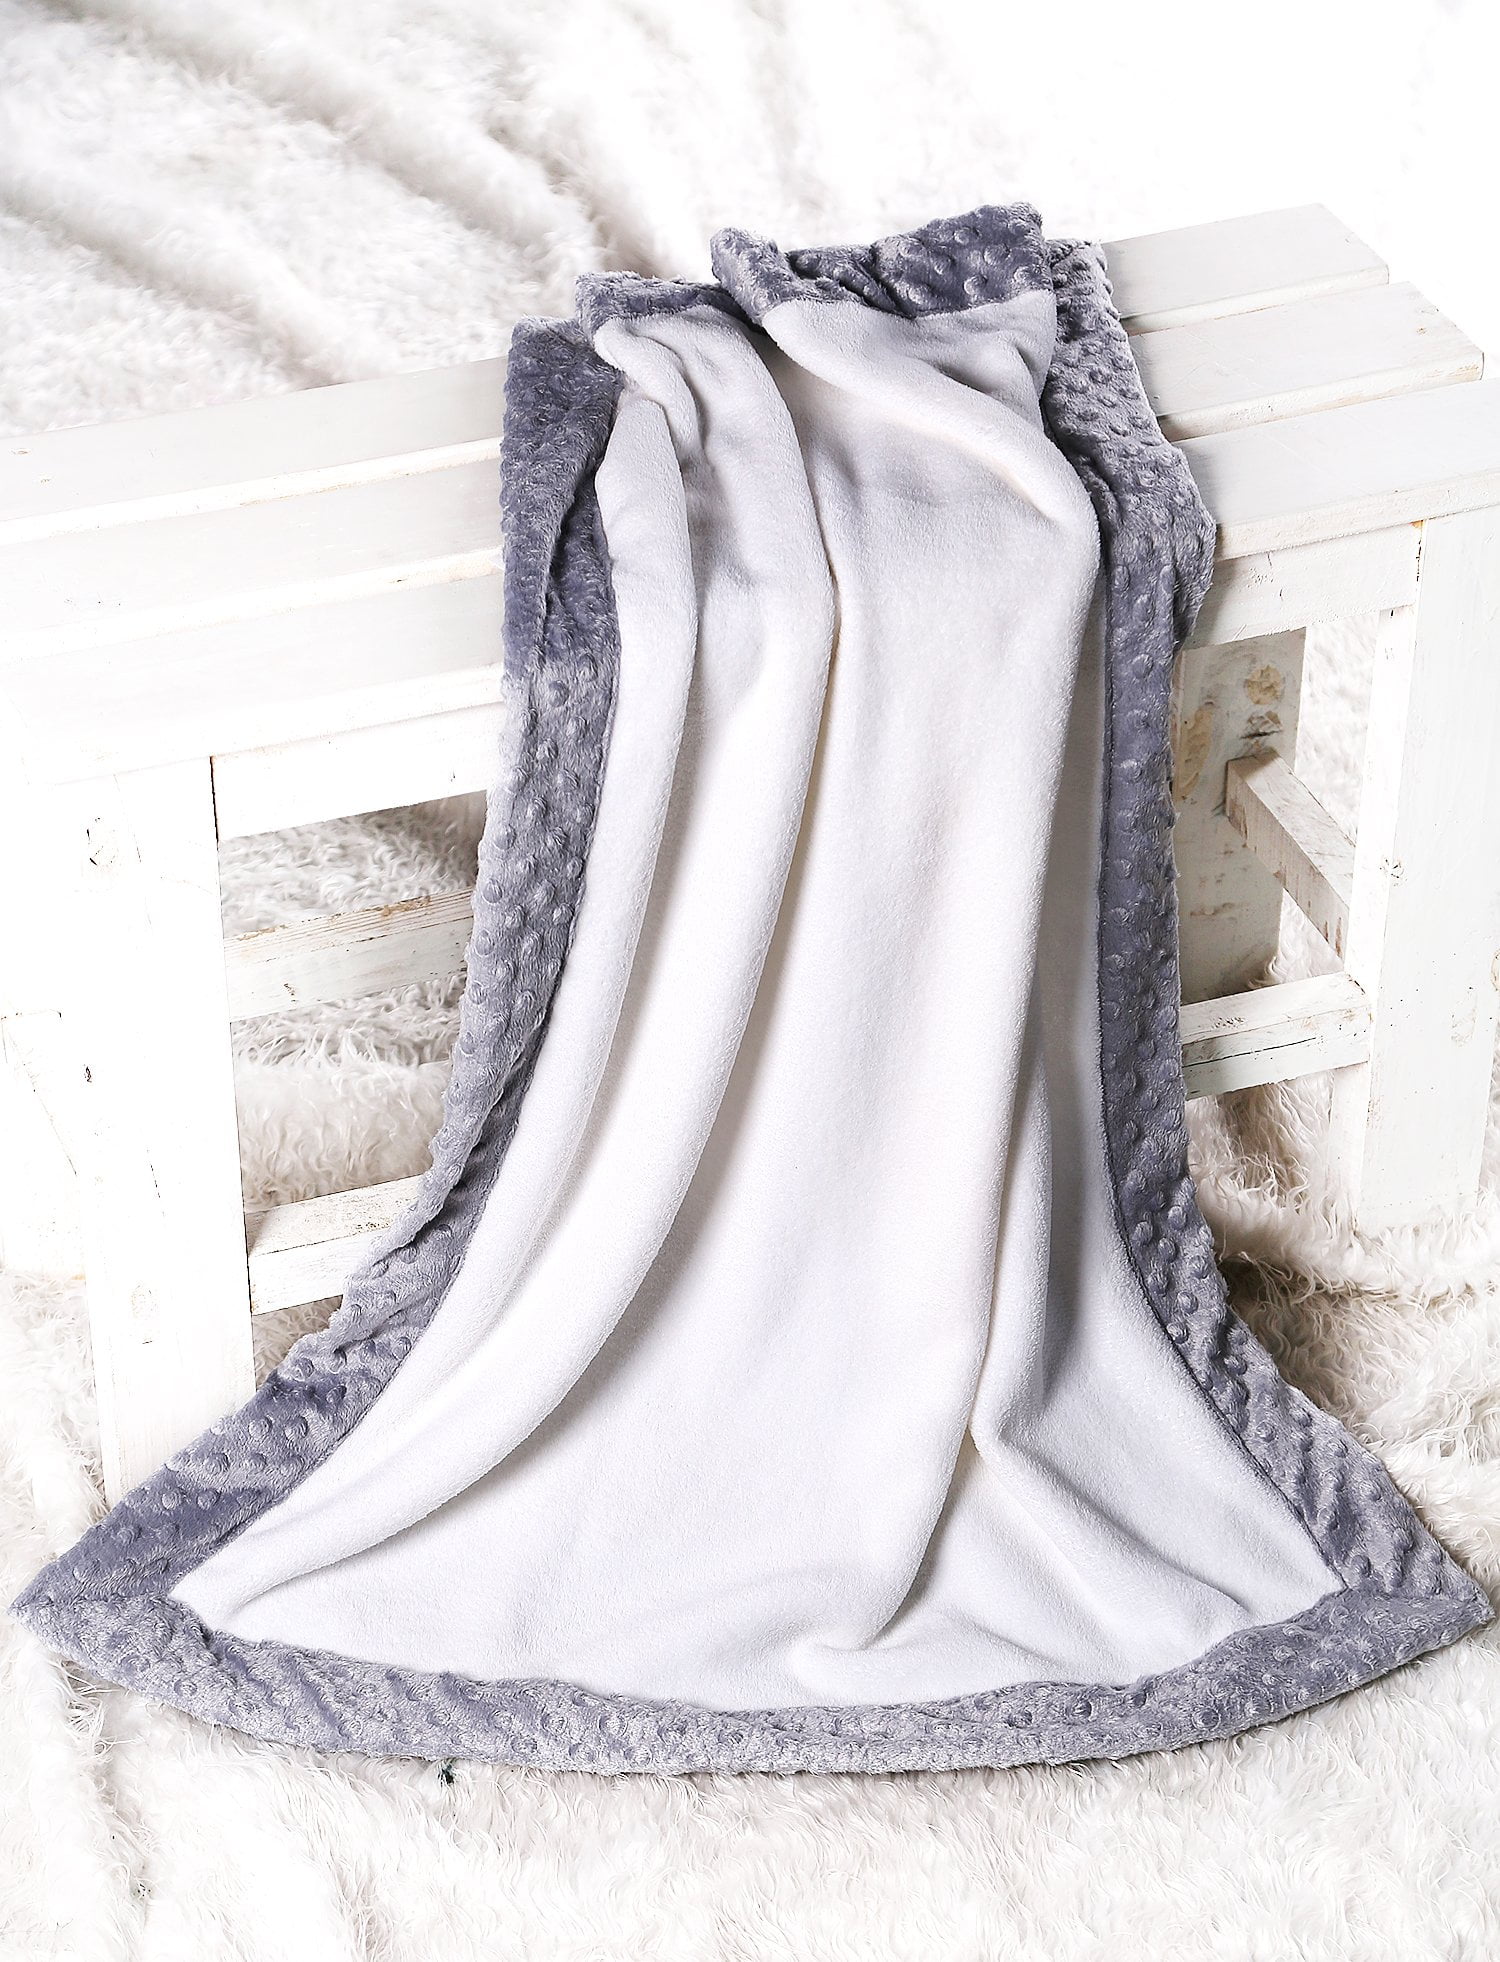 Solid Baby Blue/Grey Border Bacati Solid Center with Frame Style Border Plush Blanket 